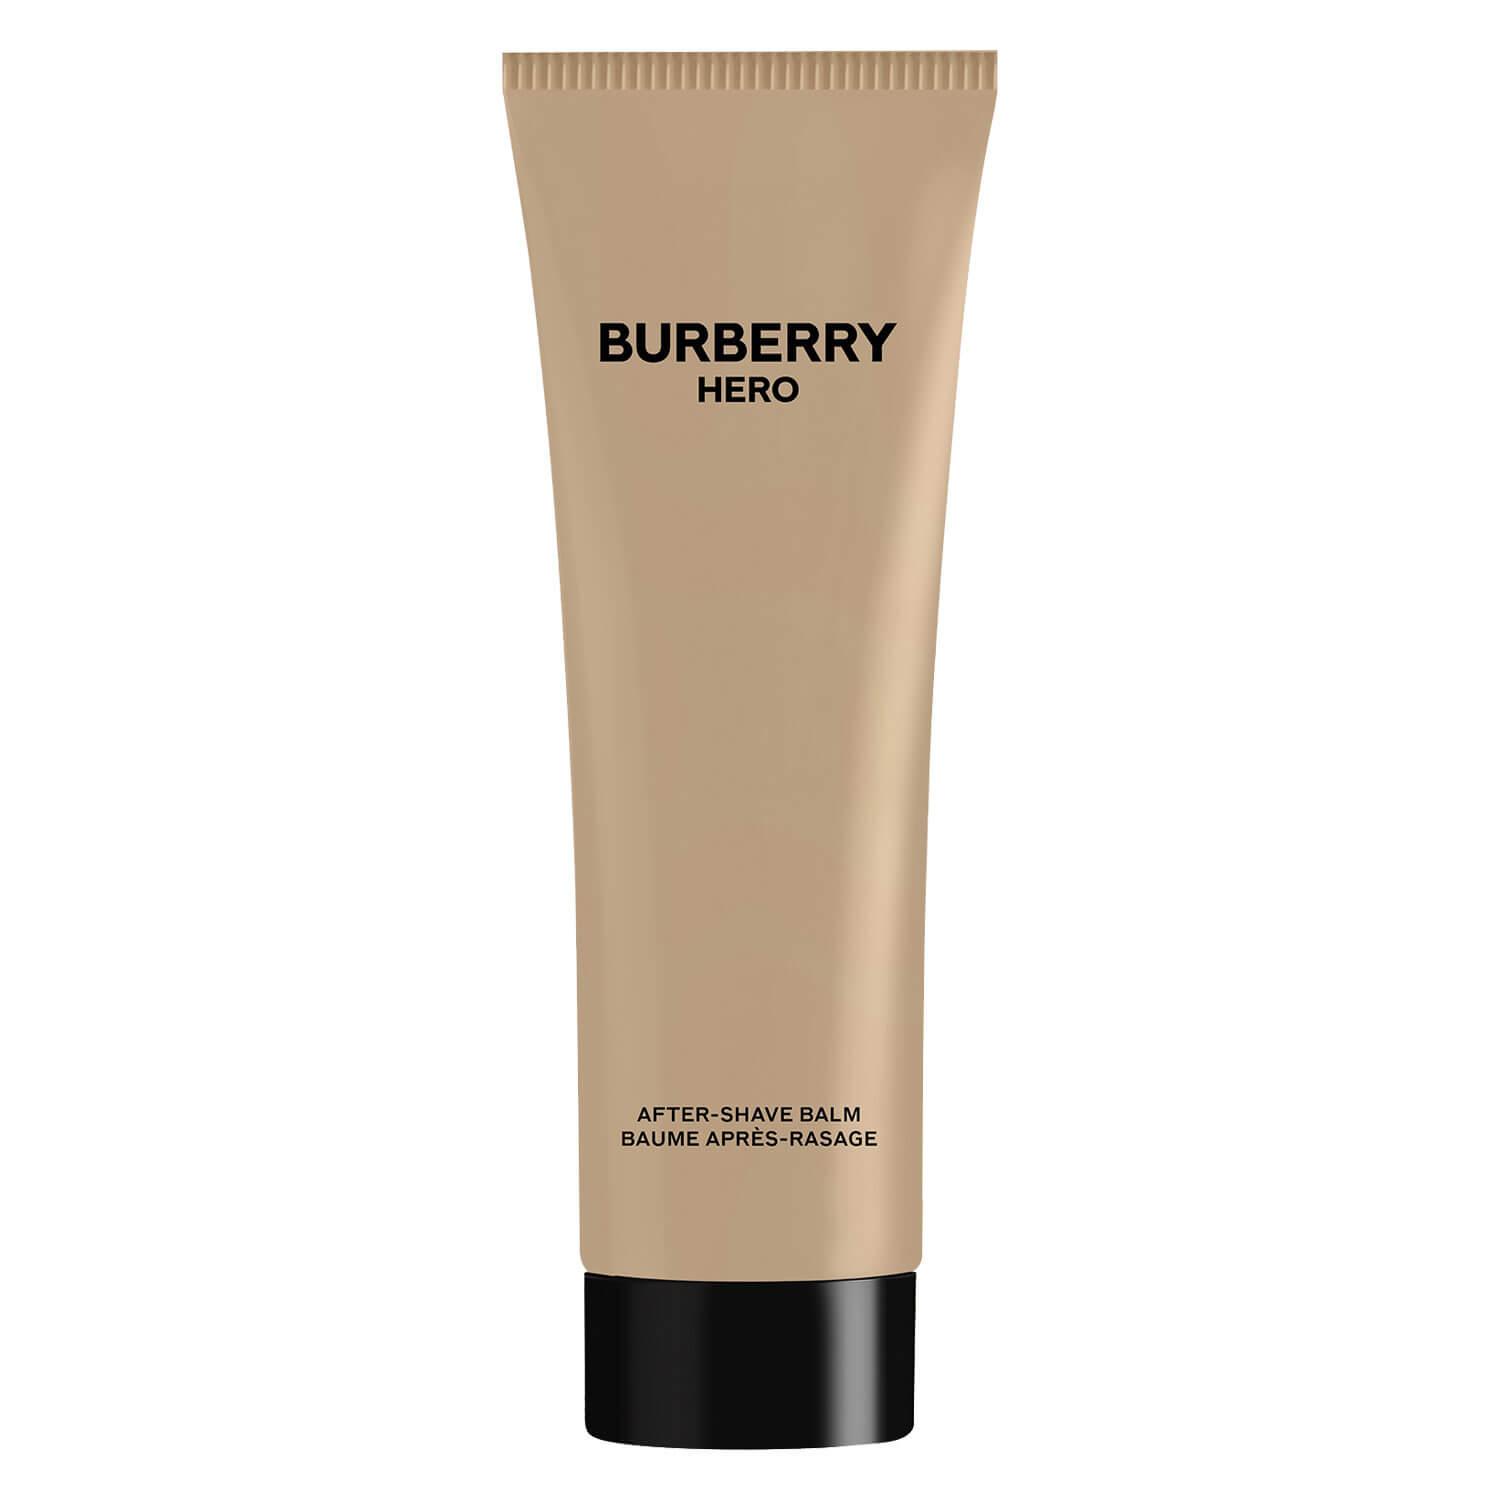 Burberry Hero - After Shave Balm